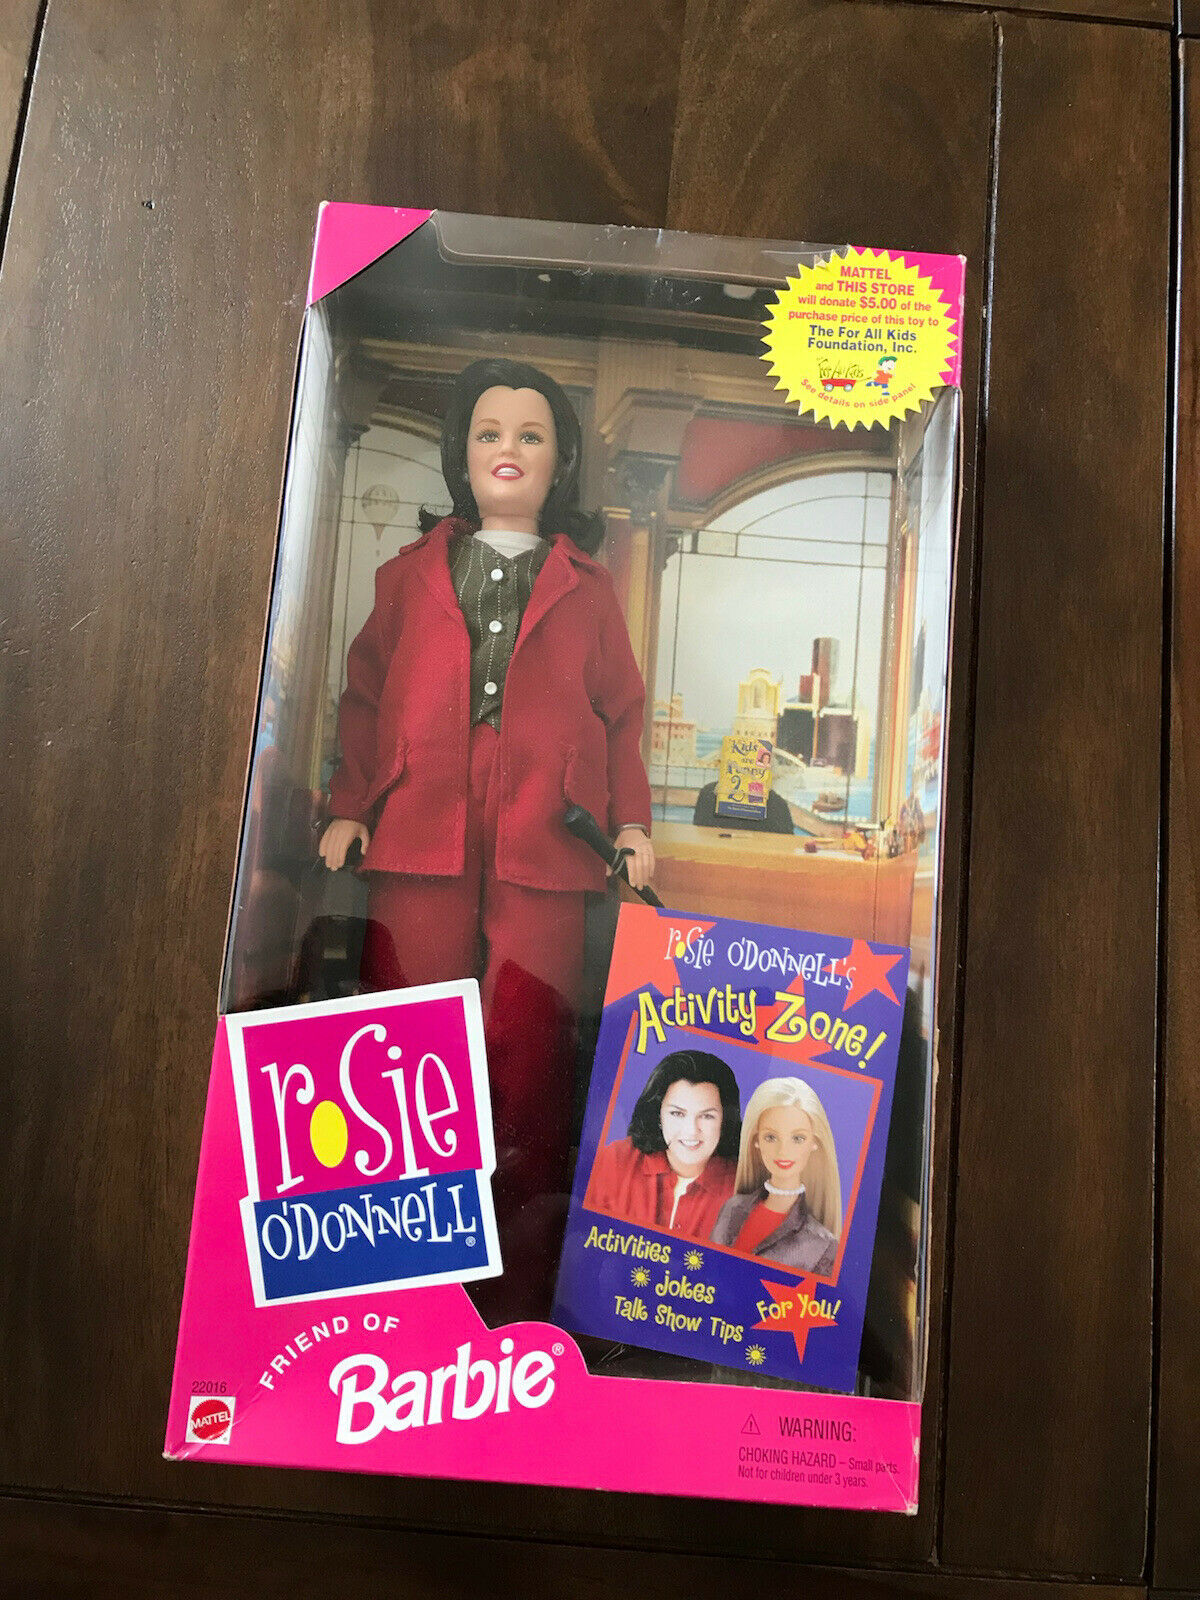 Rosie O’donnell Friend Of Barbie New In Box Vintage 1999